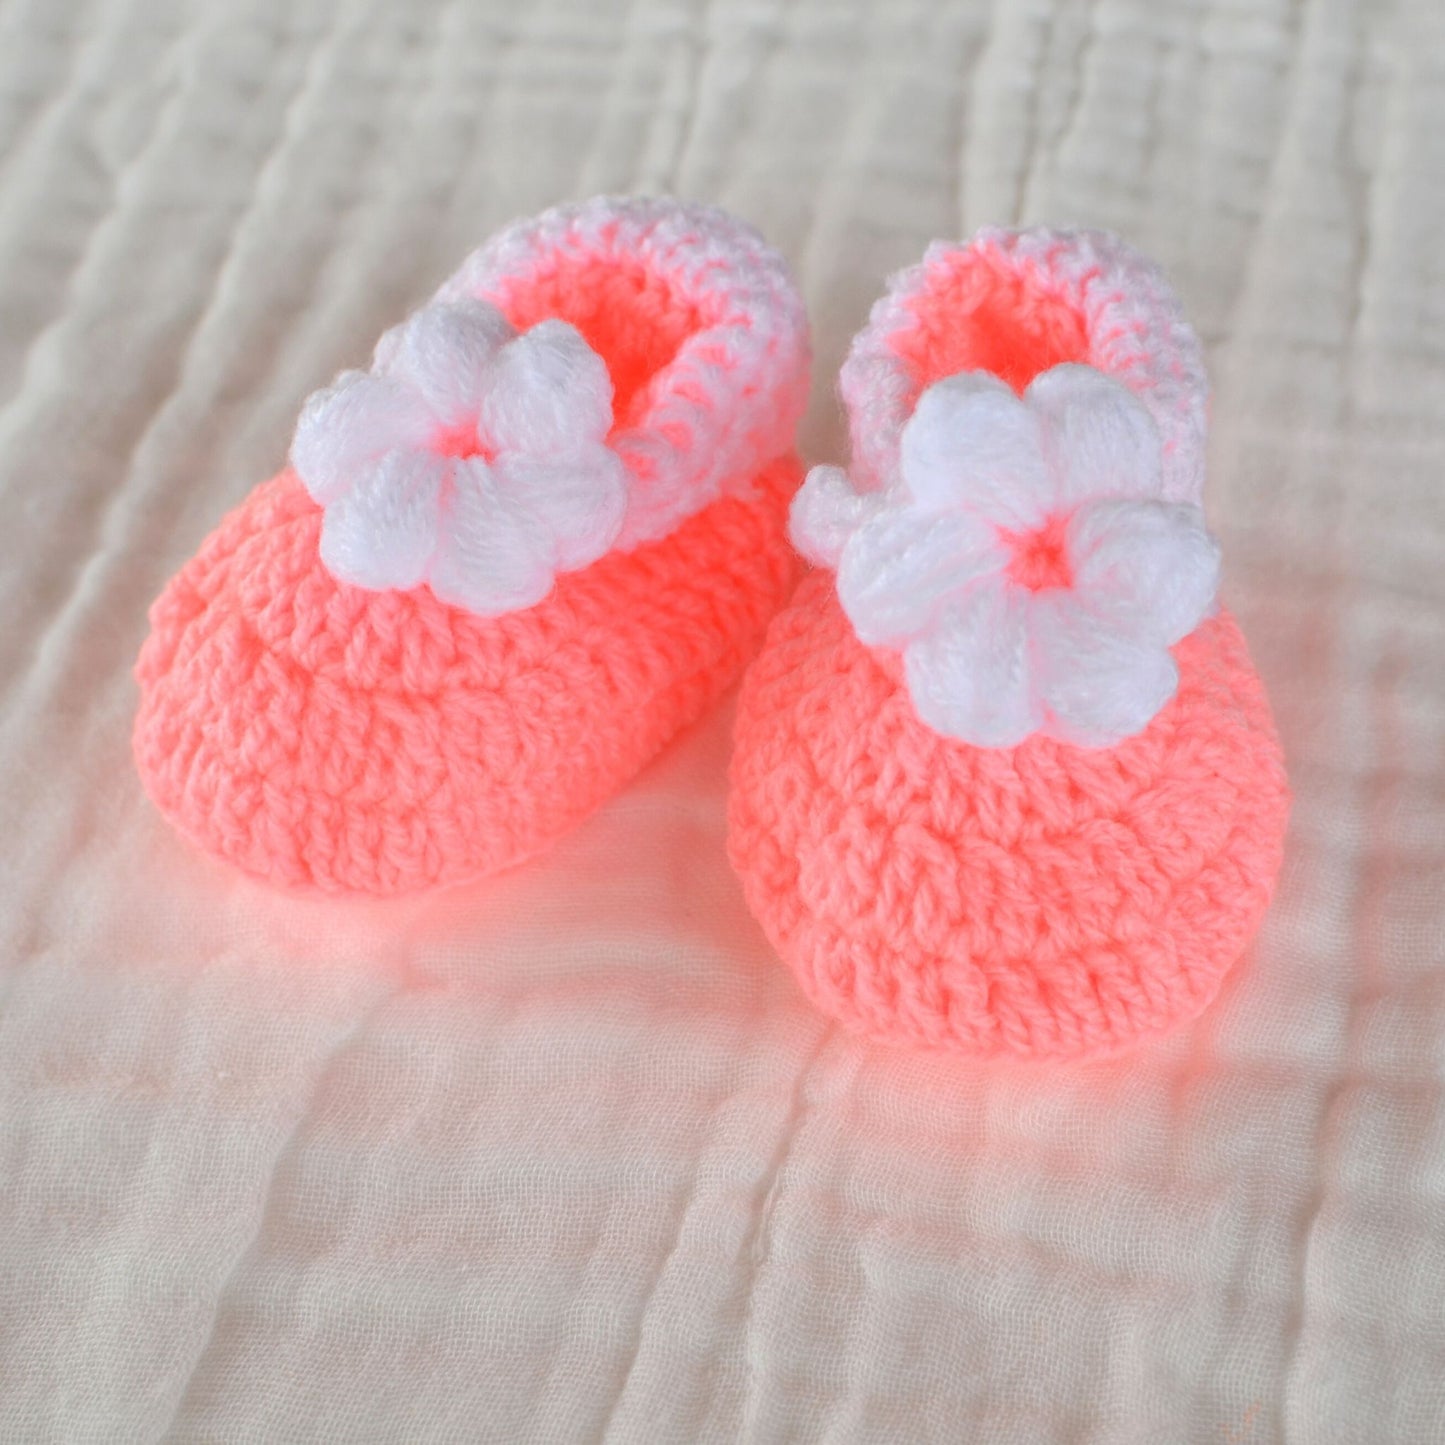 Handmade Crochet / Knitted Baby Shoes/Sandals